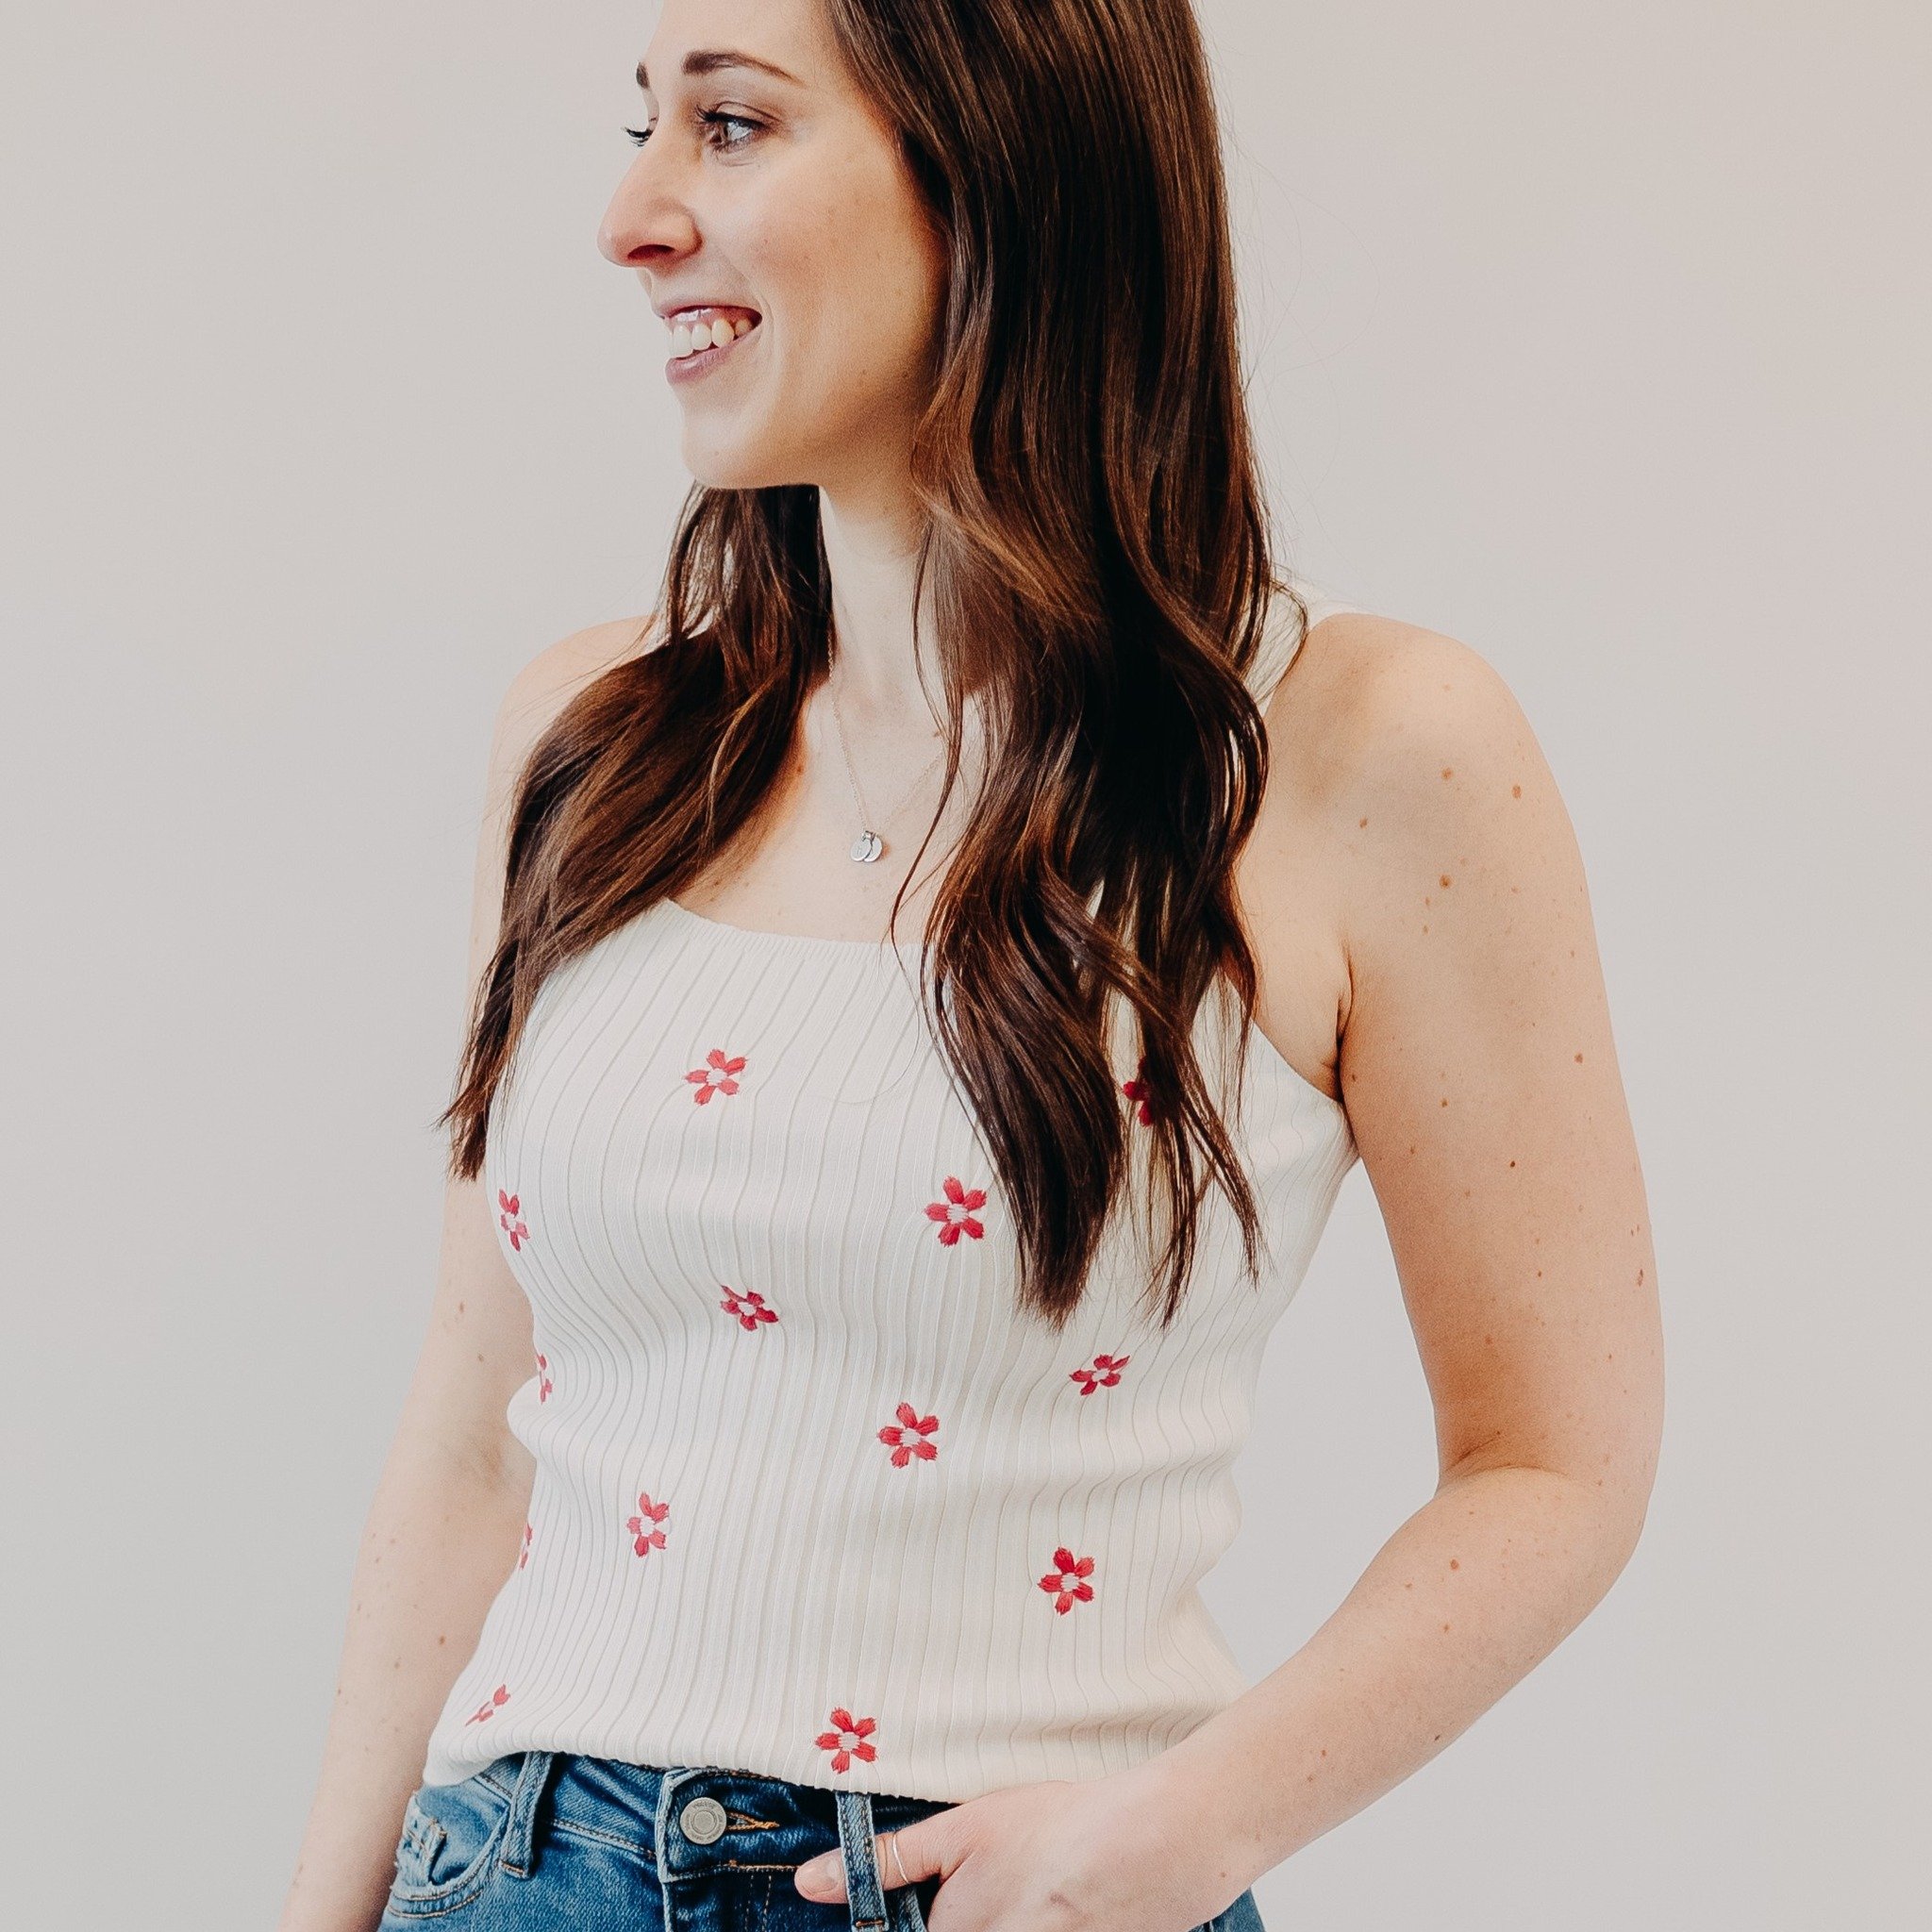 Stand out this season with our vibrant + fun NEW ARRIVALS! ❤️🤍💙

Warm weather is here to stay + we are already stocking up for Summer Festivities! Stop in to see us + check out our newest arrivals! 

#newarrivals #eauclaire #boutiquefashion #womens